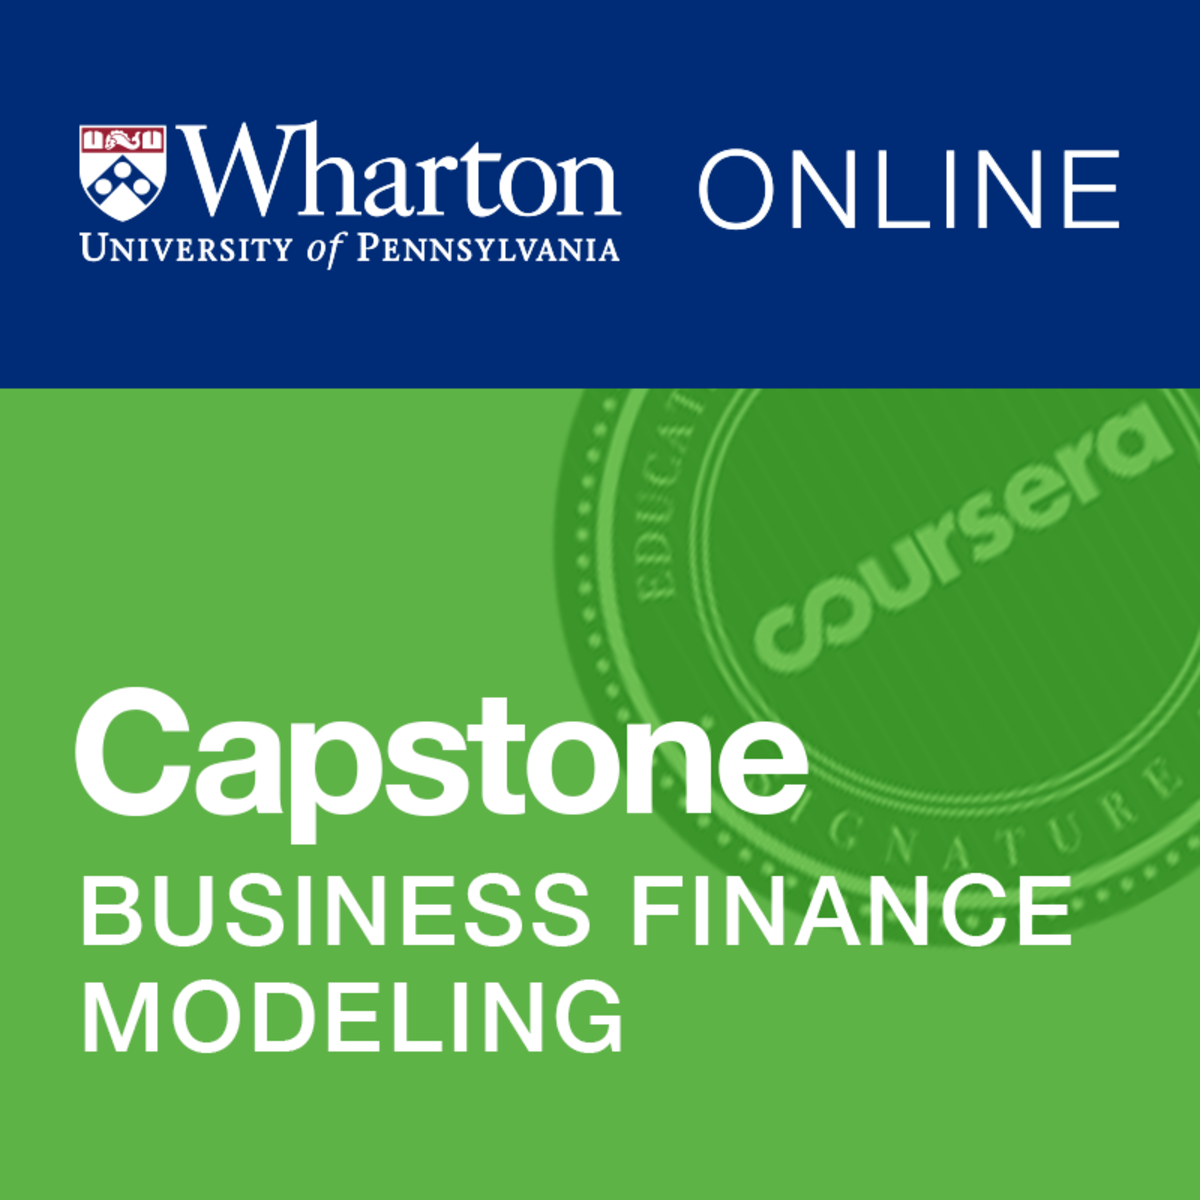 Wharton Business and Financial Modeling Capstone Coursera